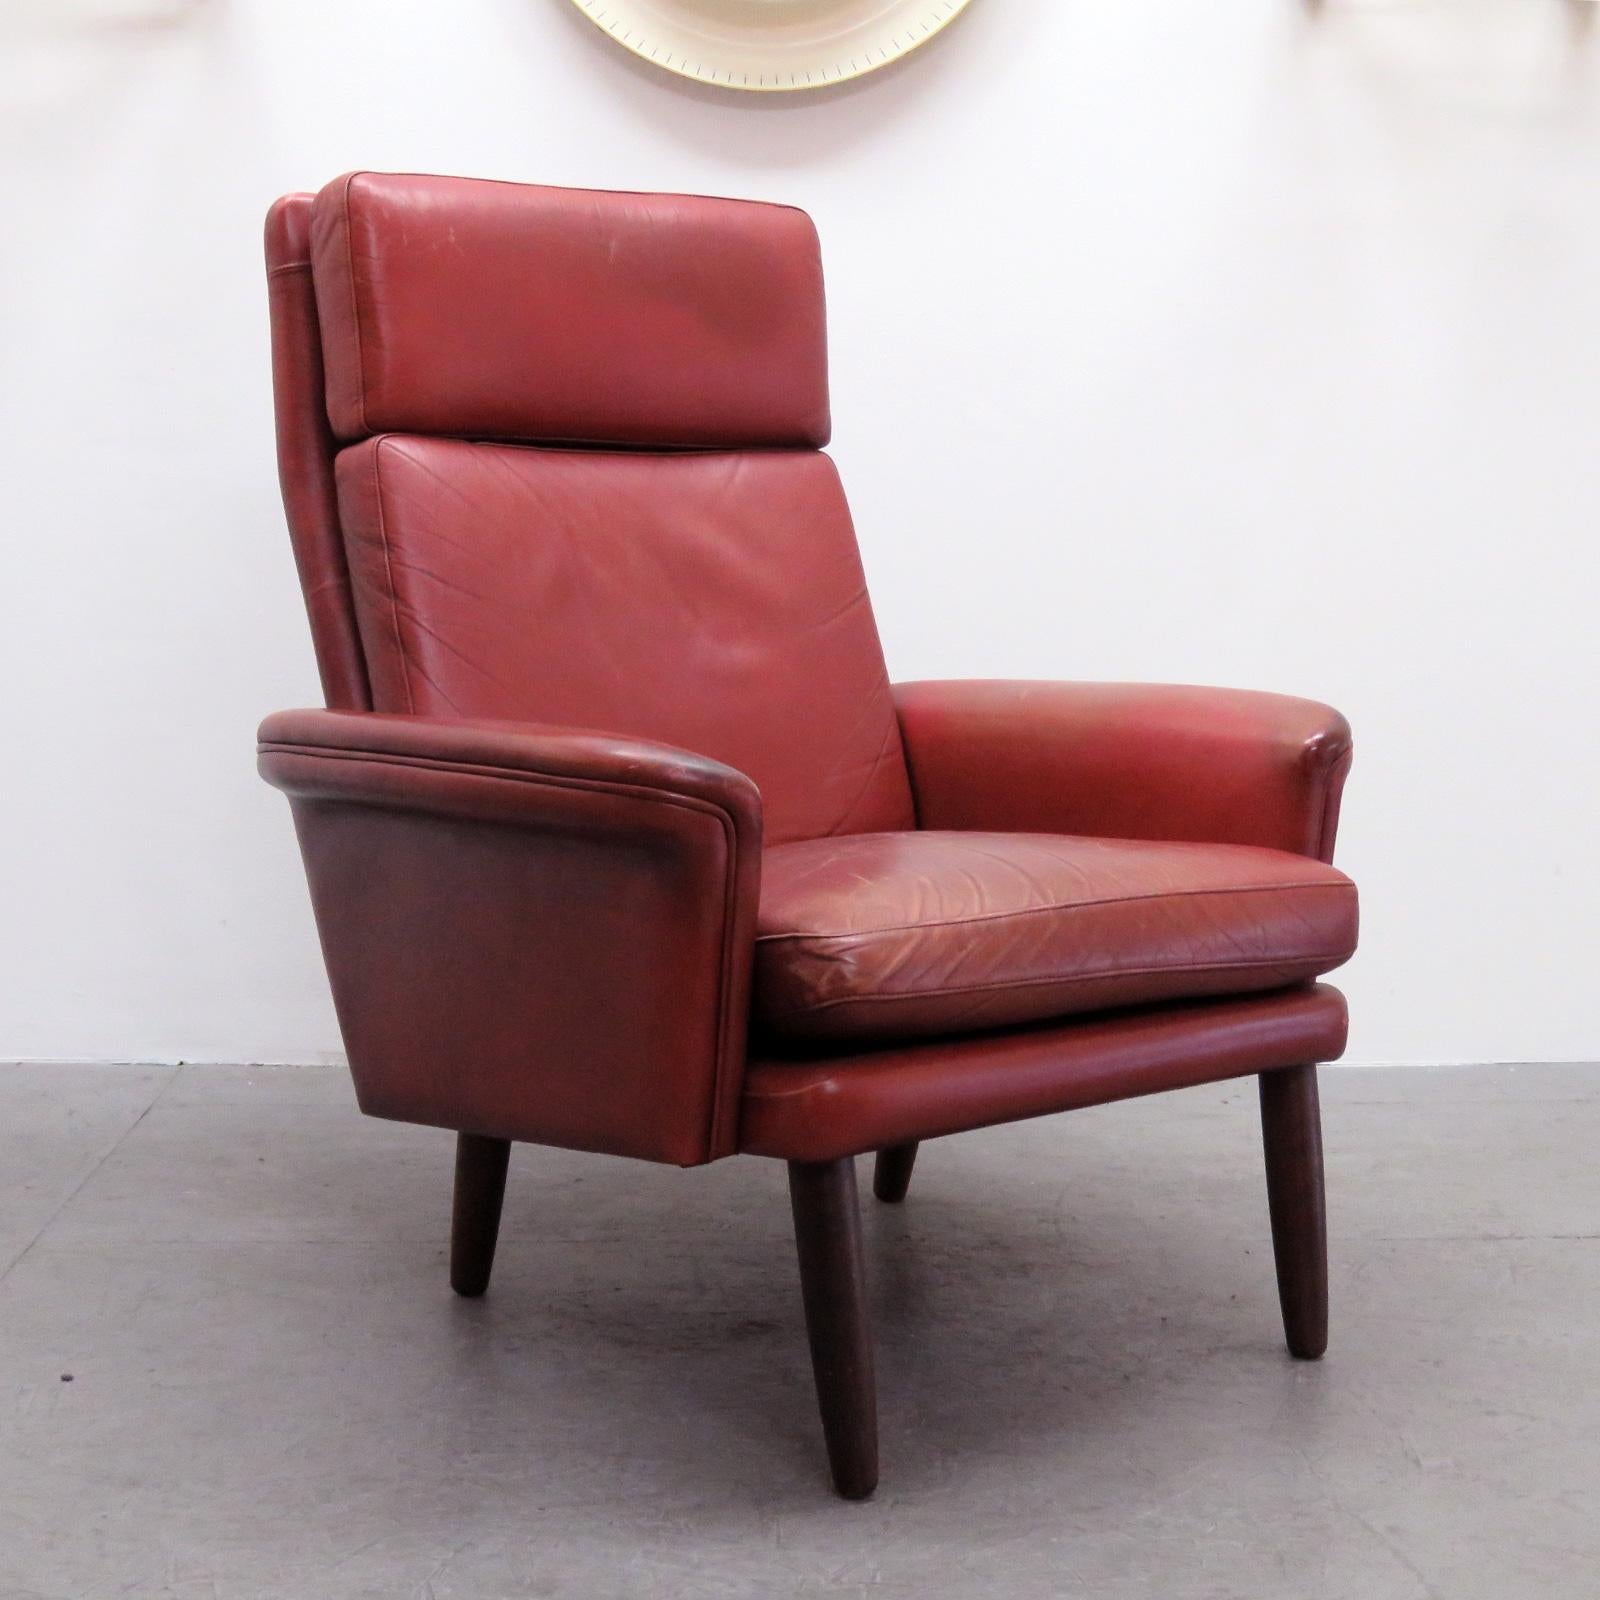 Mid-Century Modern Danish High Back Leather Lounge Chair, 1960 For Sale